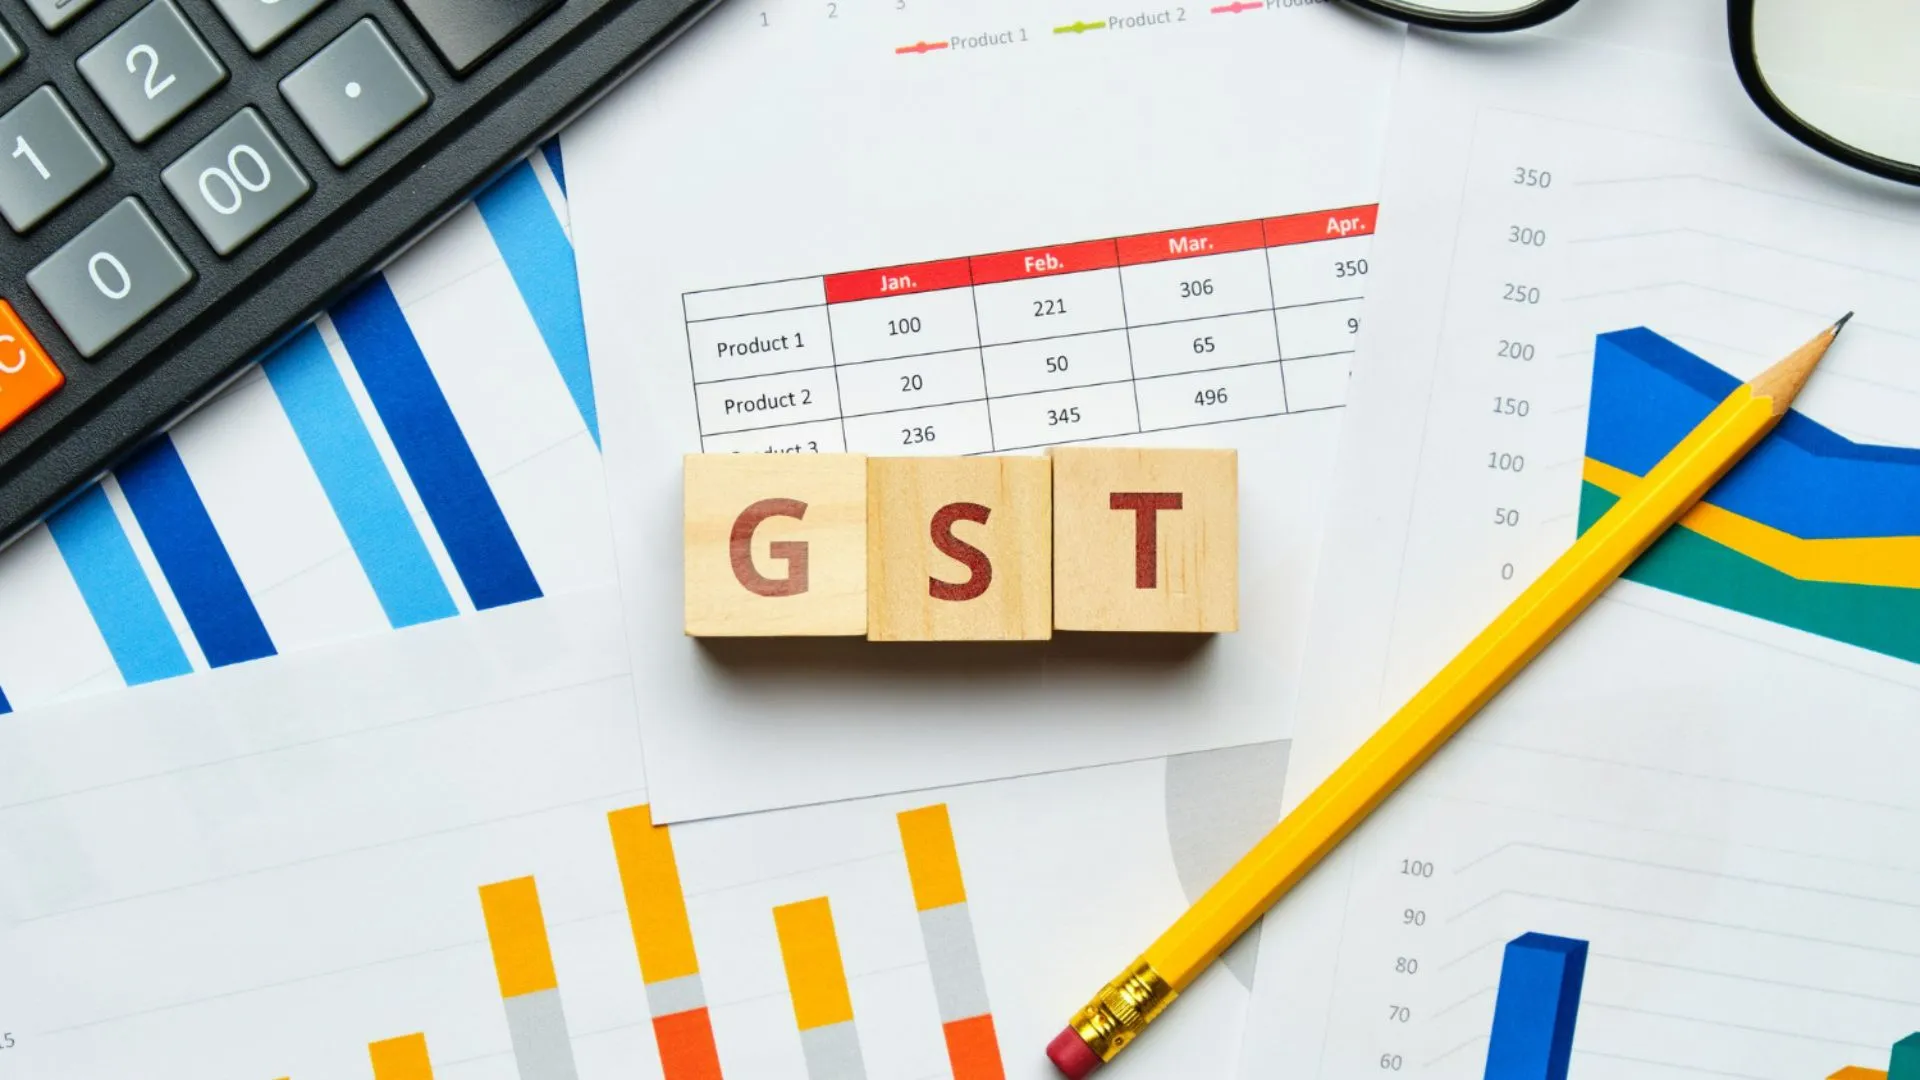 What is GST,GST Types, and how does it affect companies and buyers?